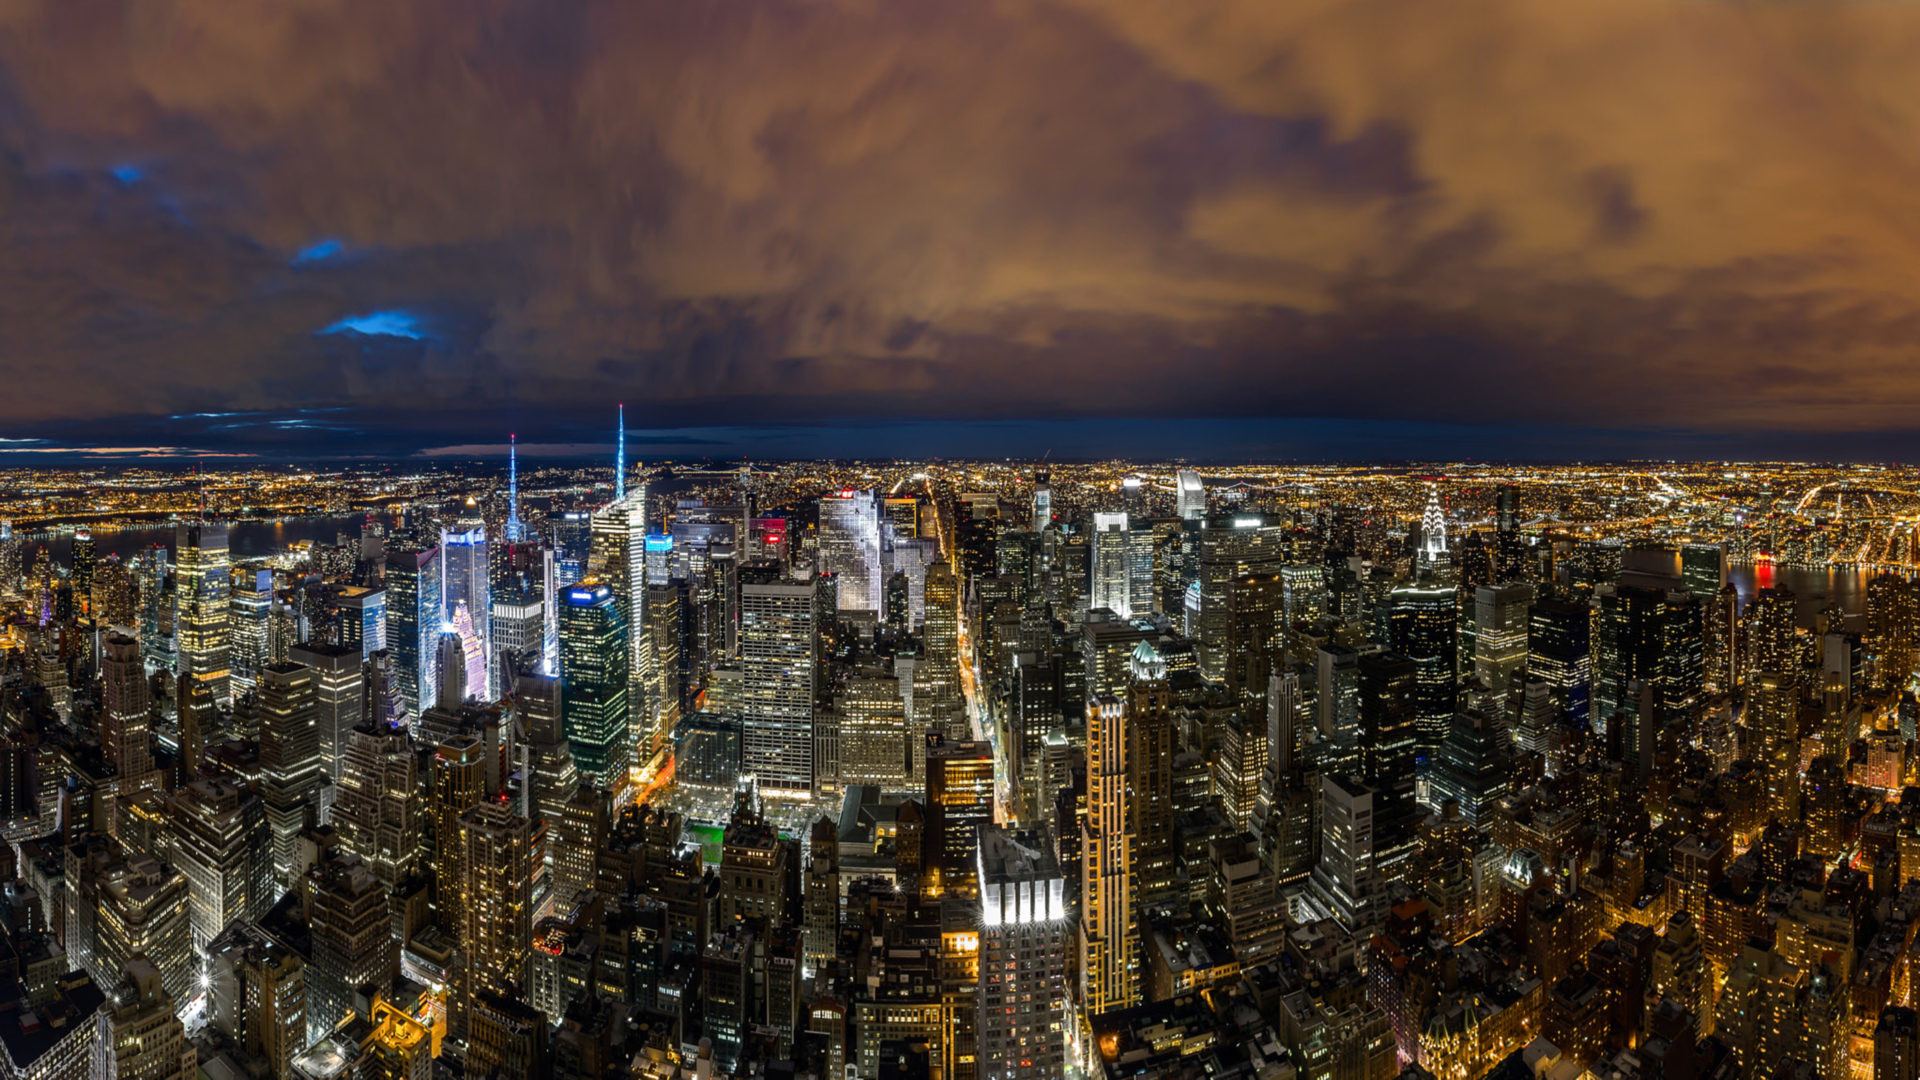 New York Cityscape At Night Aerial View Panorama United States Of America Best HD Desktop Wallpaper For Tablets And Mobile Phones, Wallpaper13.com